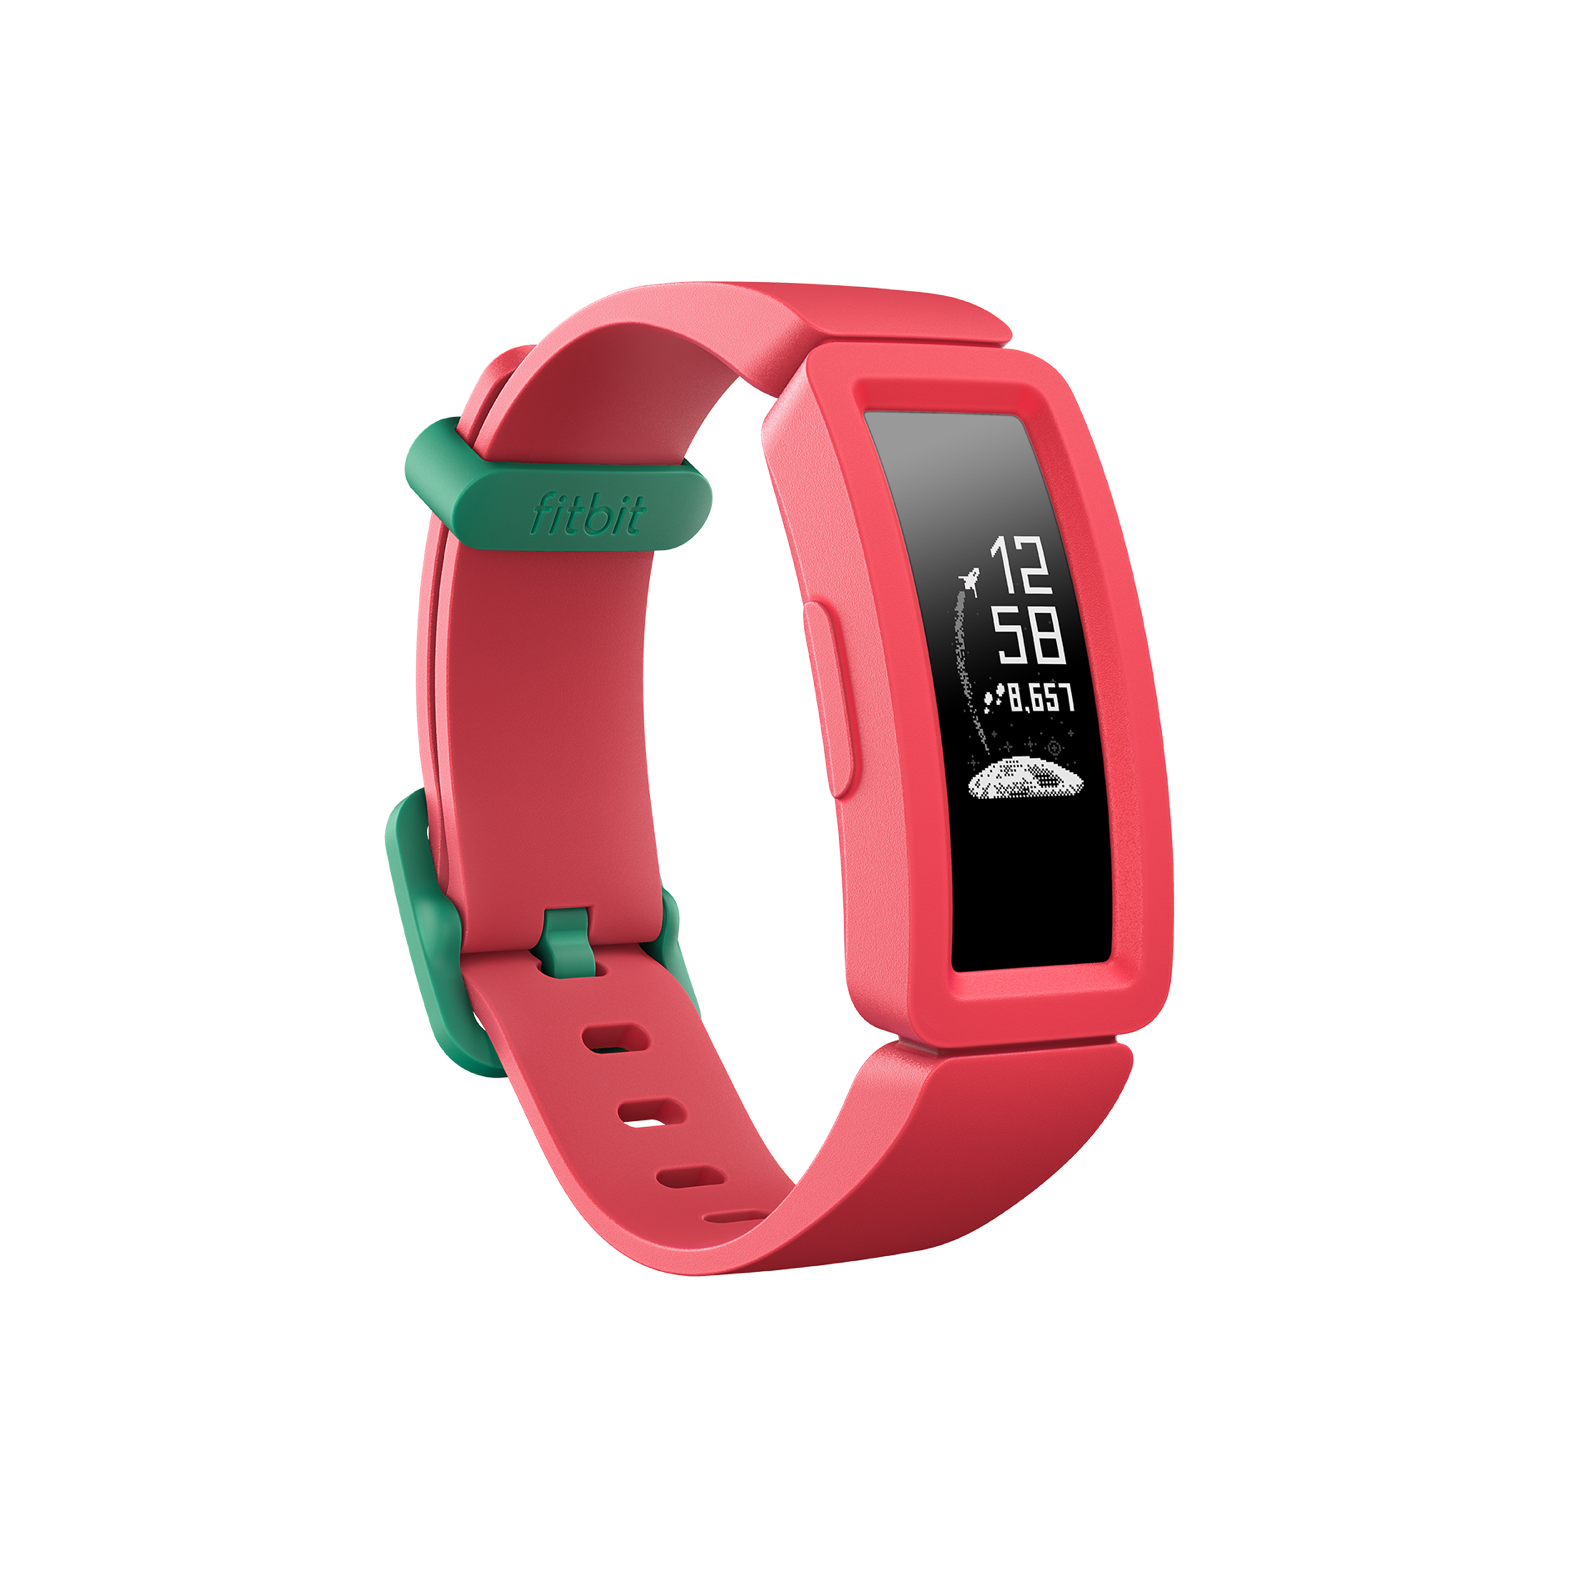 Fitbit Ace 2™ (Watermelon/Teal)